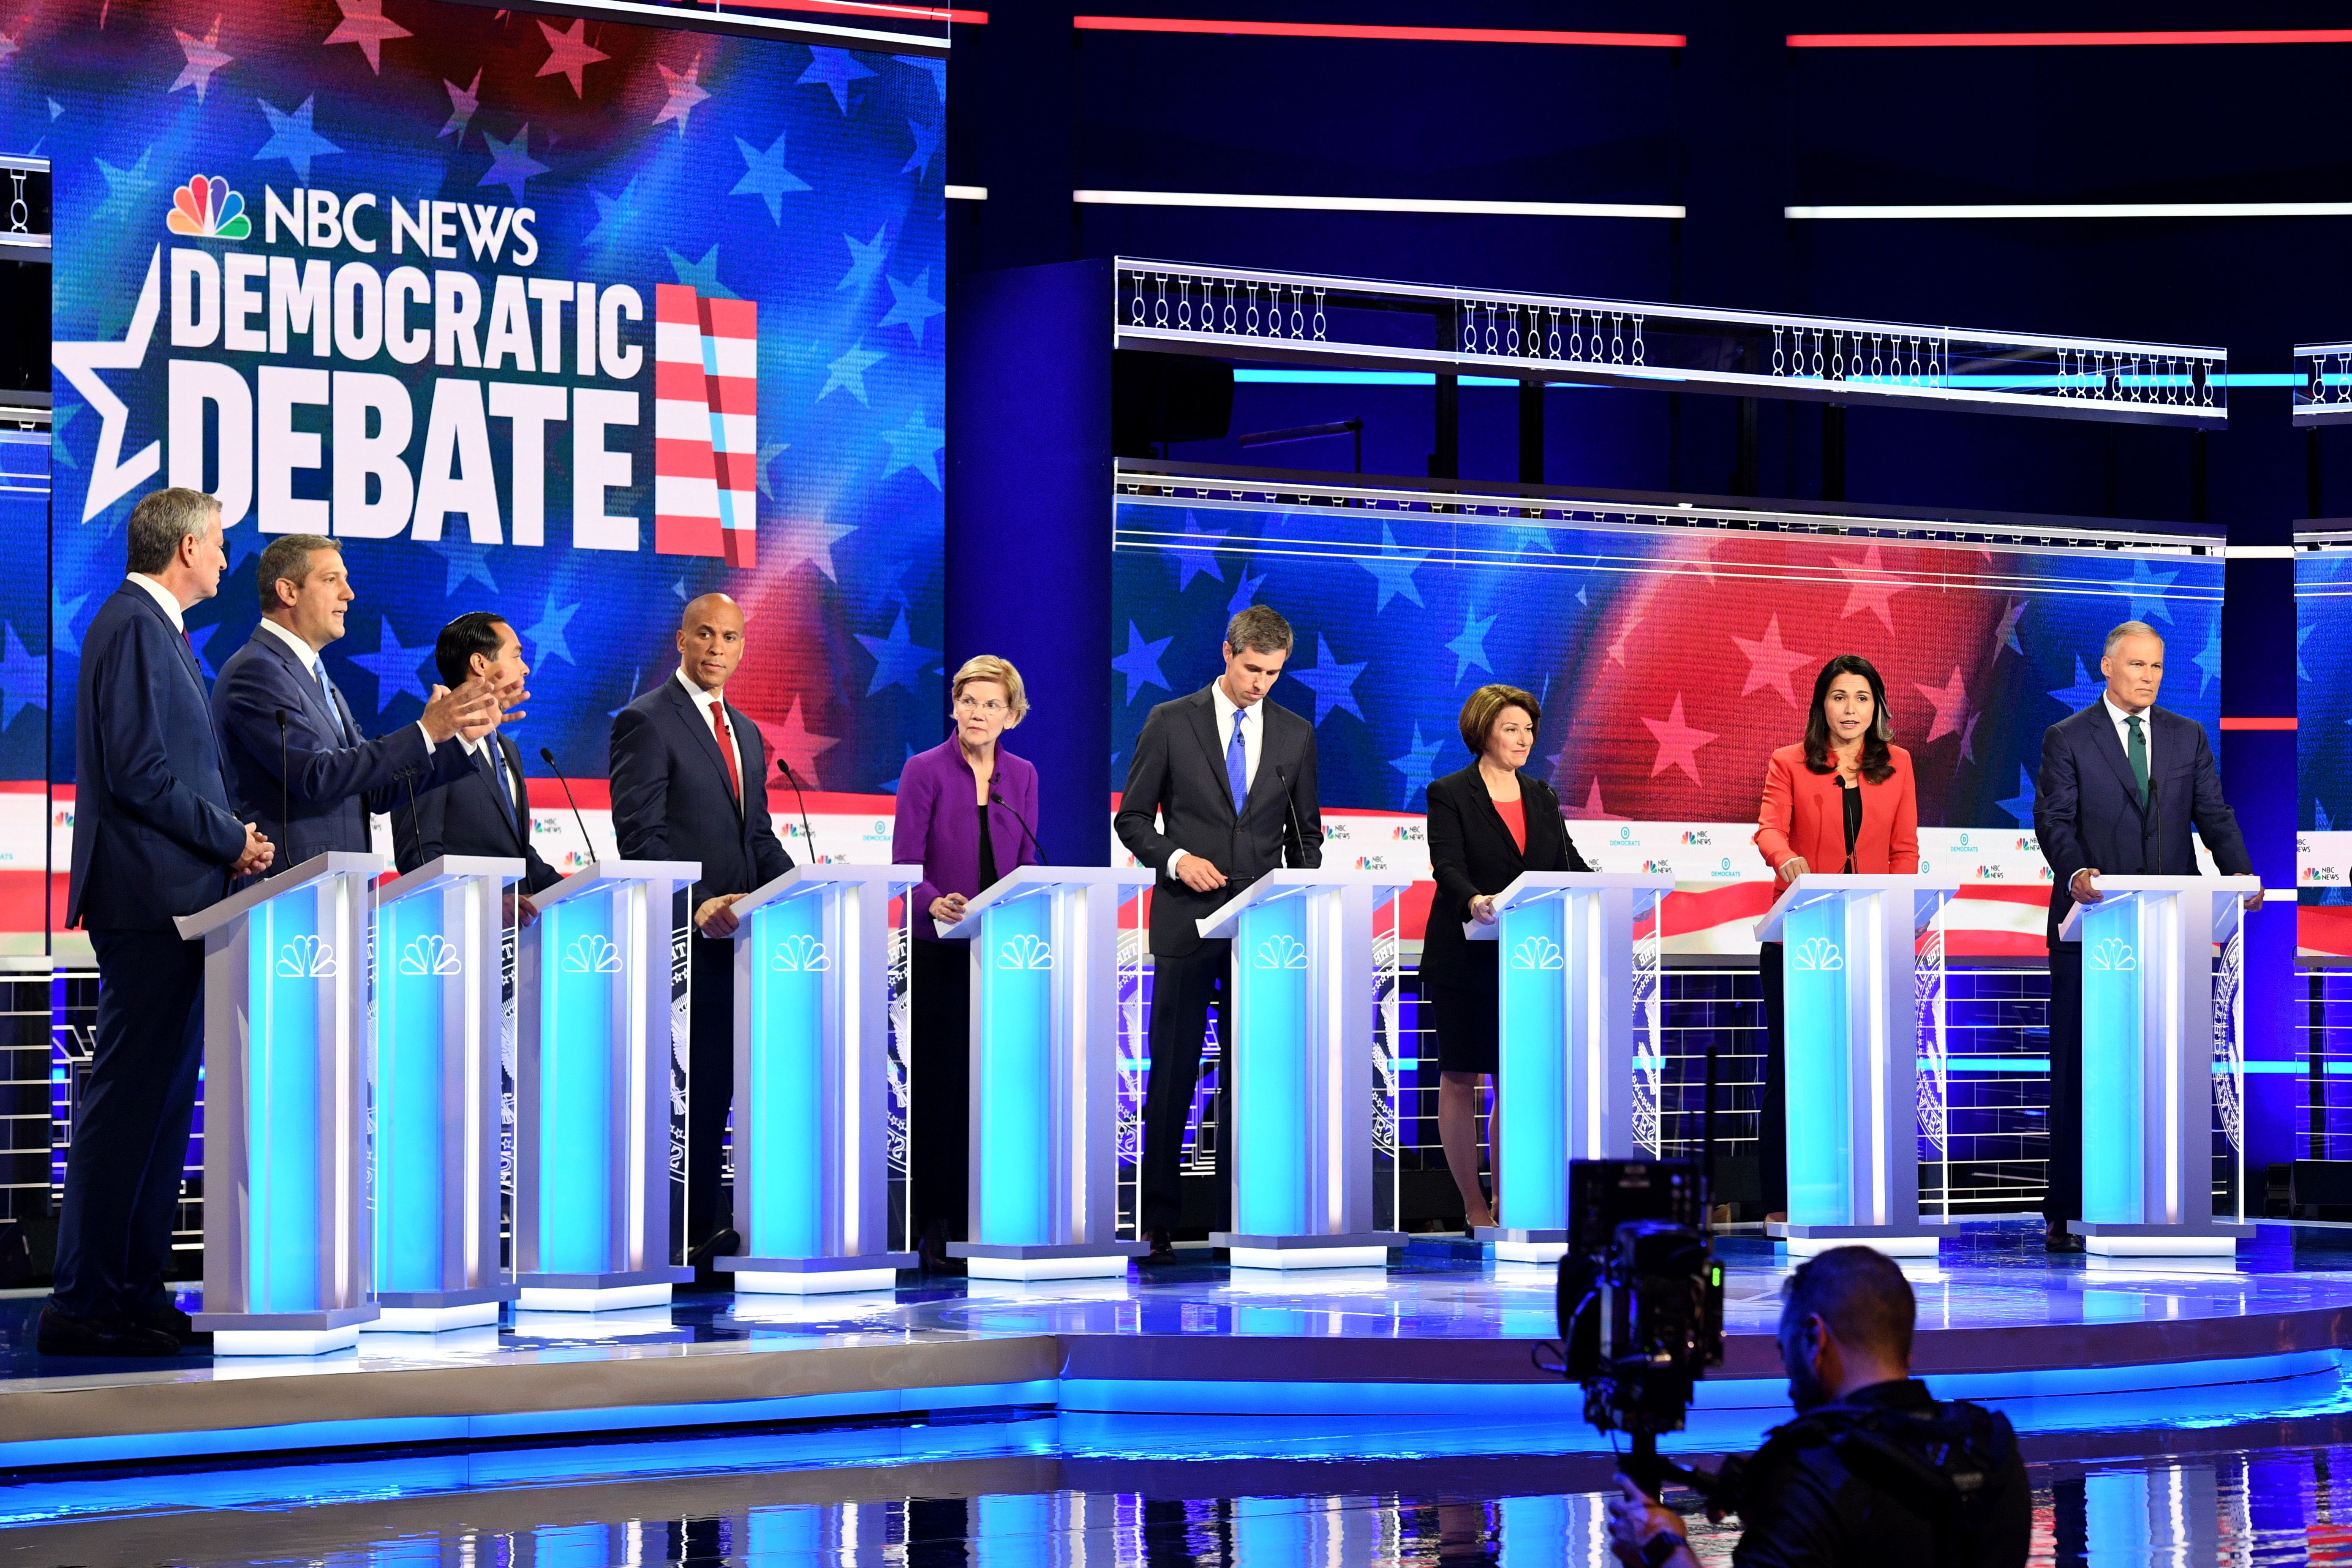 China is US’ Biggest Threat, Democratic Candidates Say During Debate